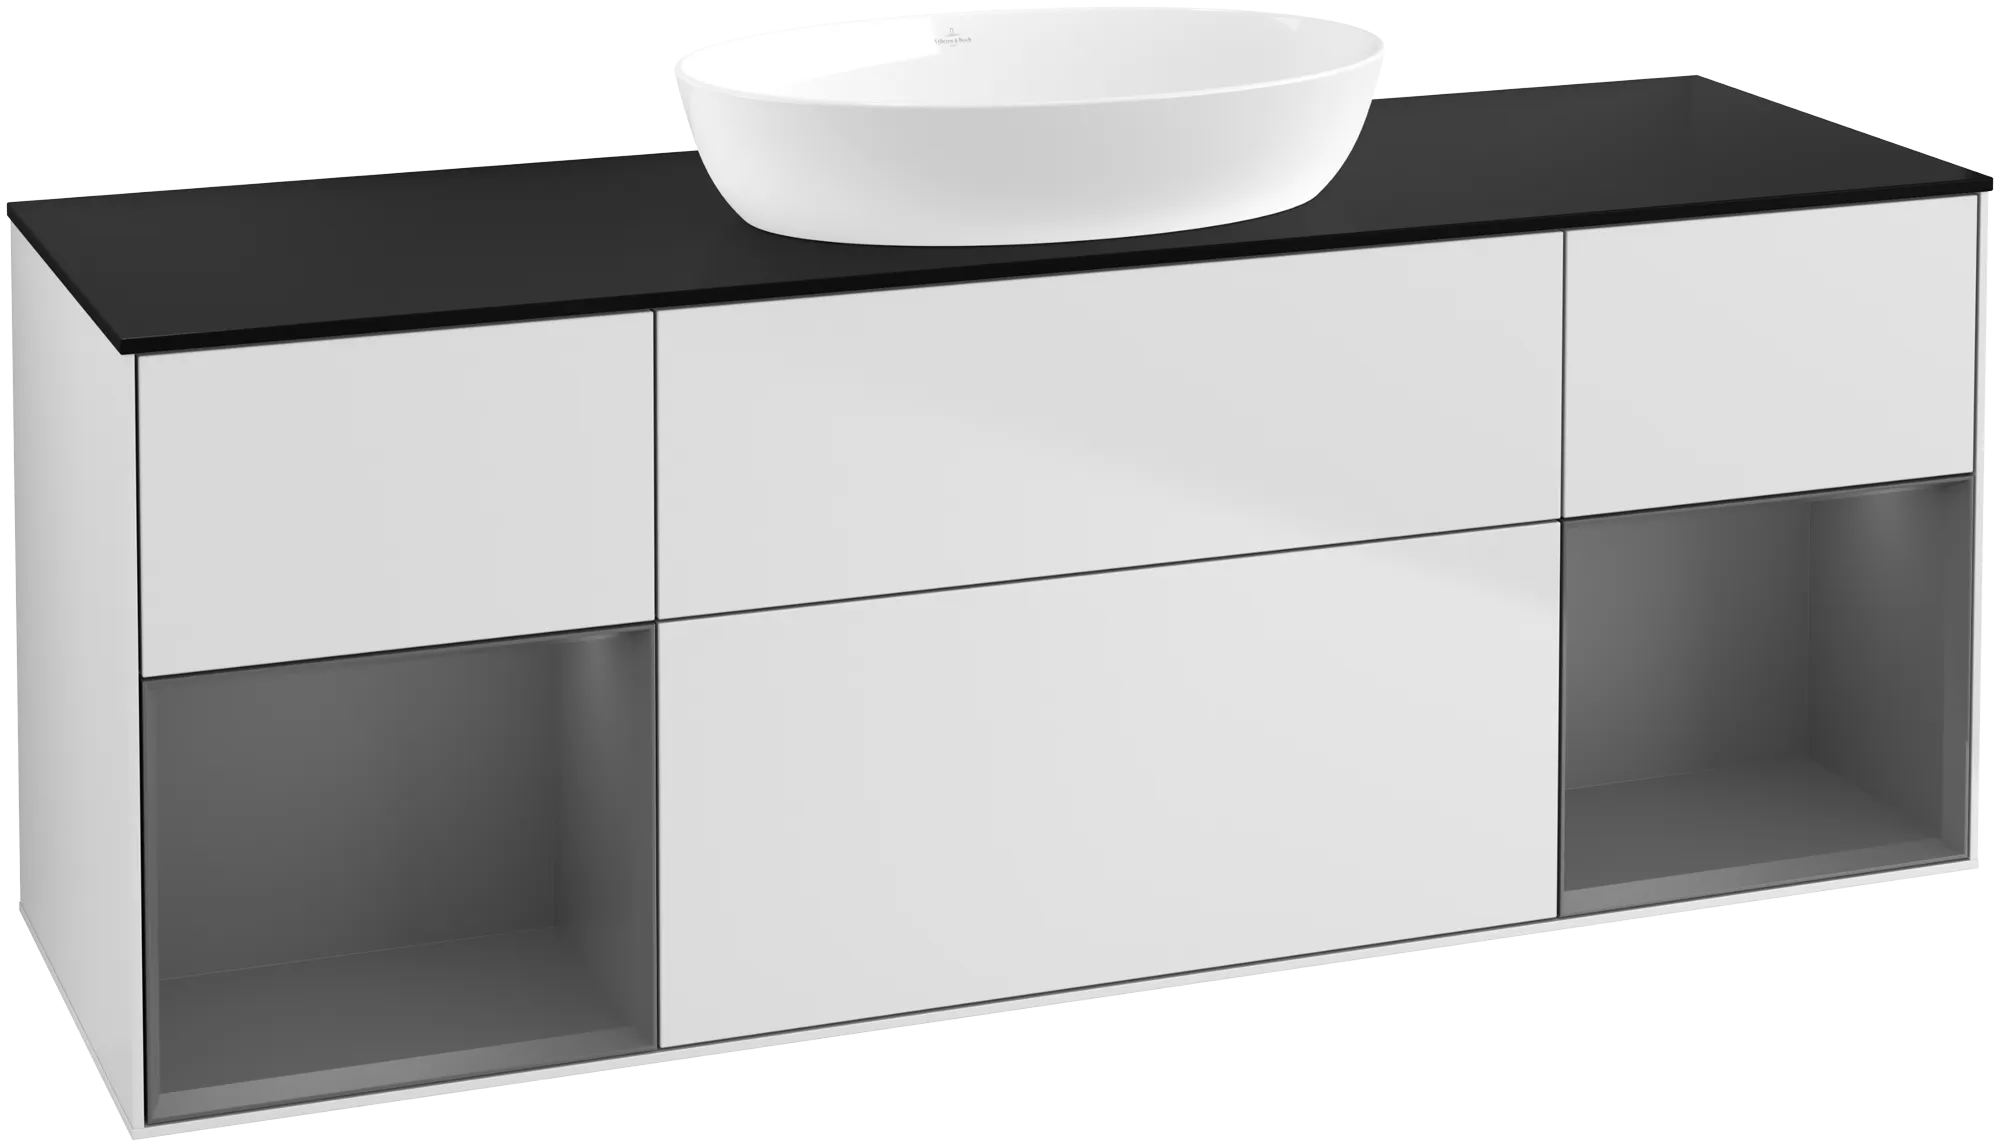 Picture of VILLEROY BOCH Finion Vanity unit, with lighting, 4 pull-out compartments, 1600 x 603 x 501 mm, White Matt Lacquer / Anthracite Matt Lacquer / Glass Black Matt #GD02GKMT